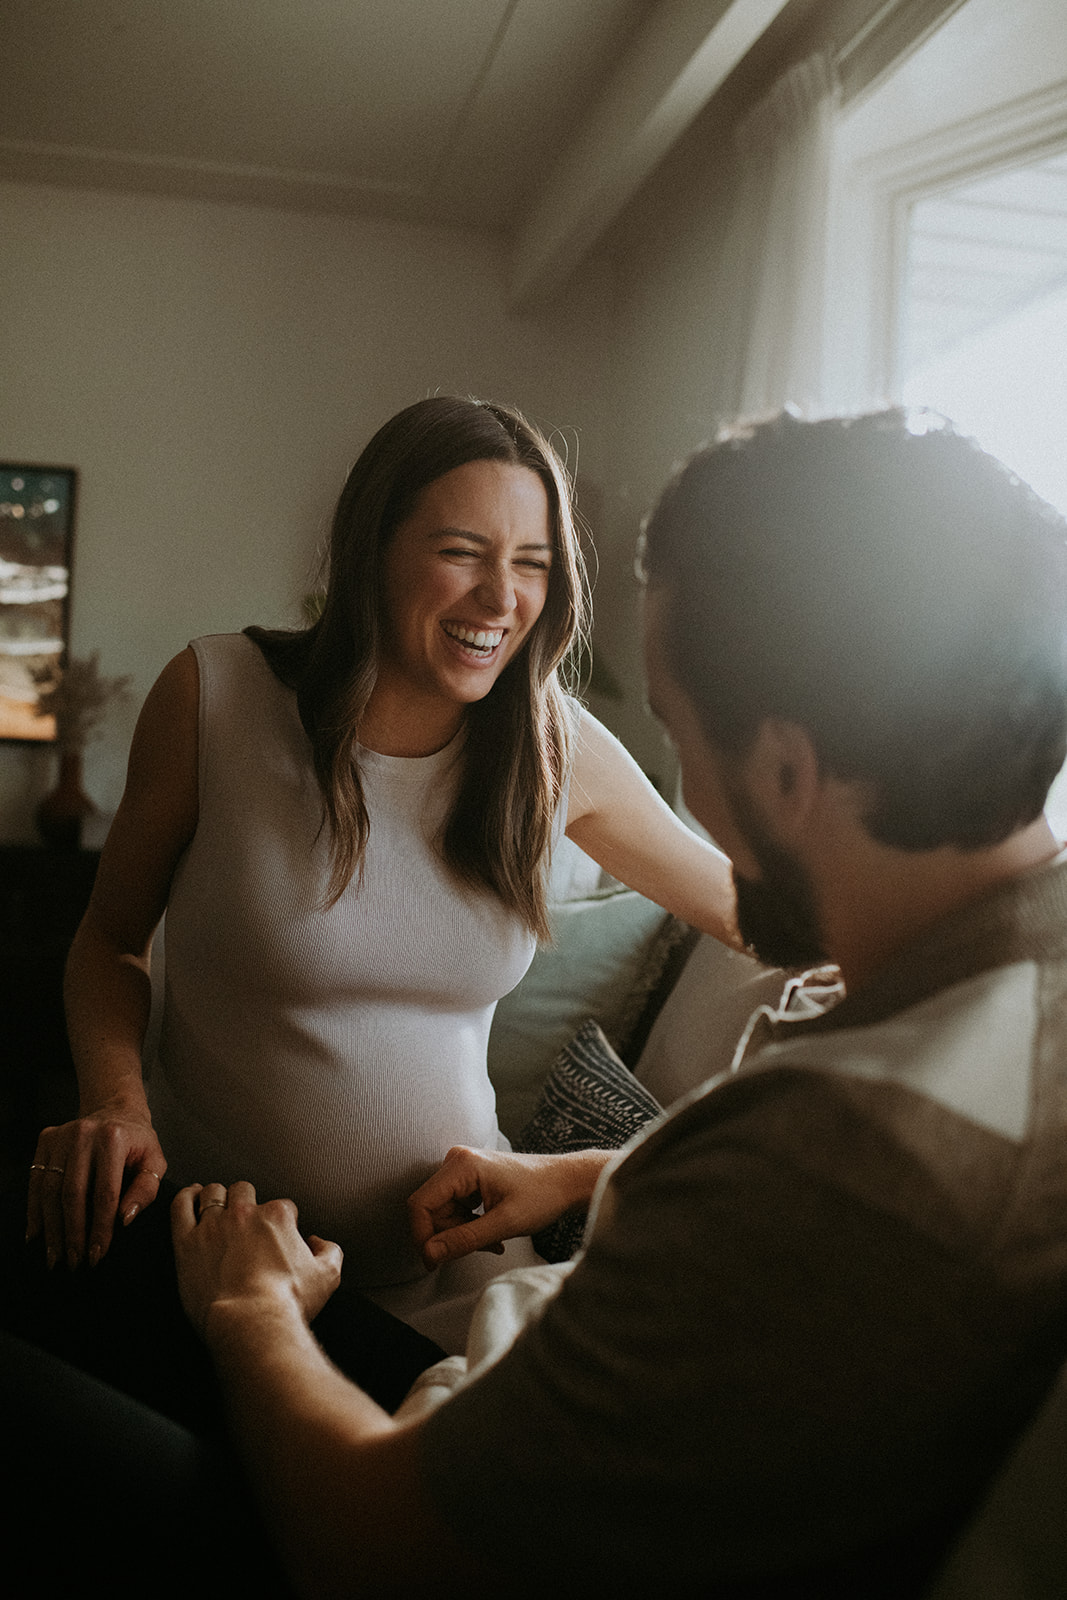 Woman laughs and smiles at her partner during their maternity photoshoot at home